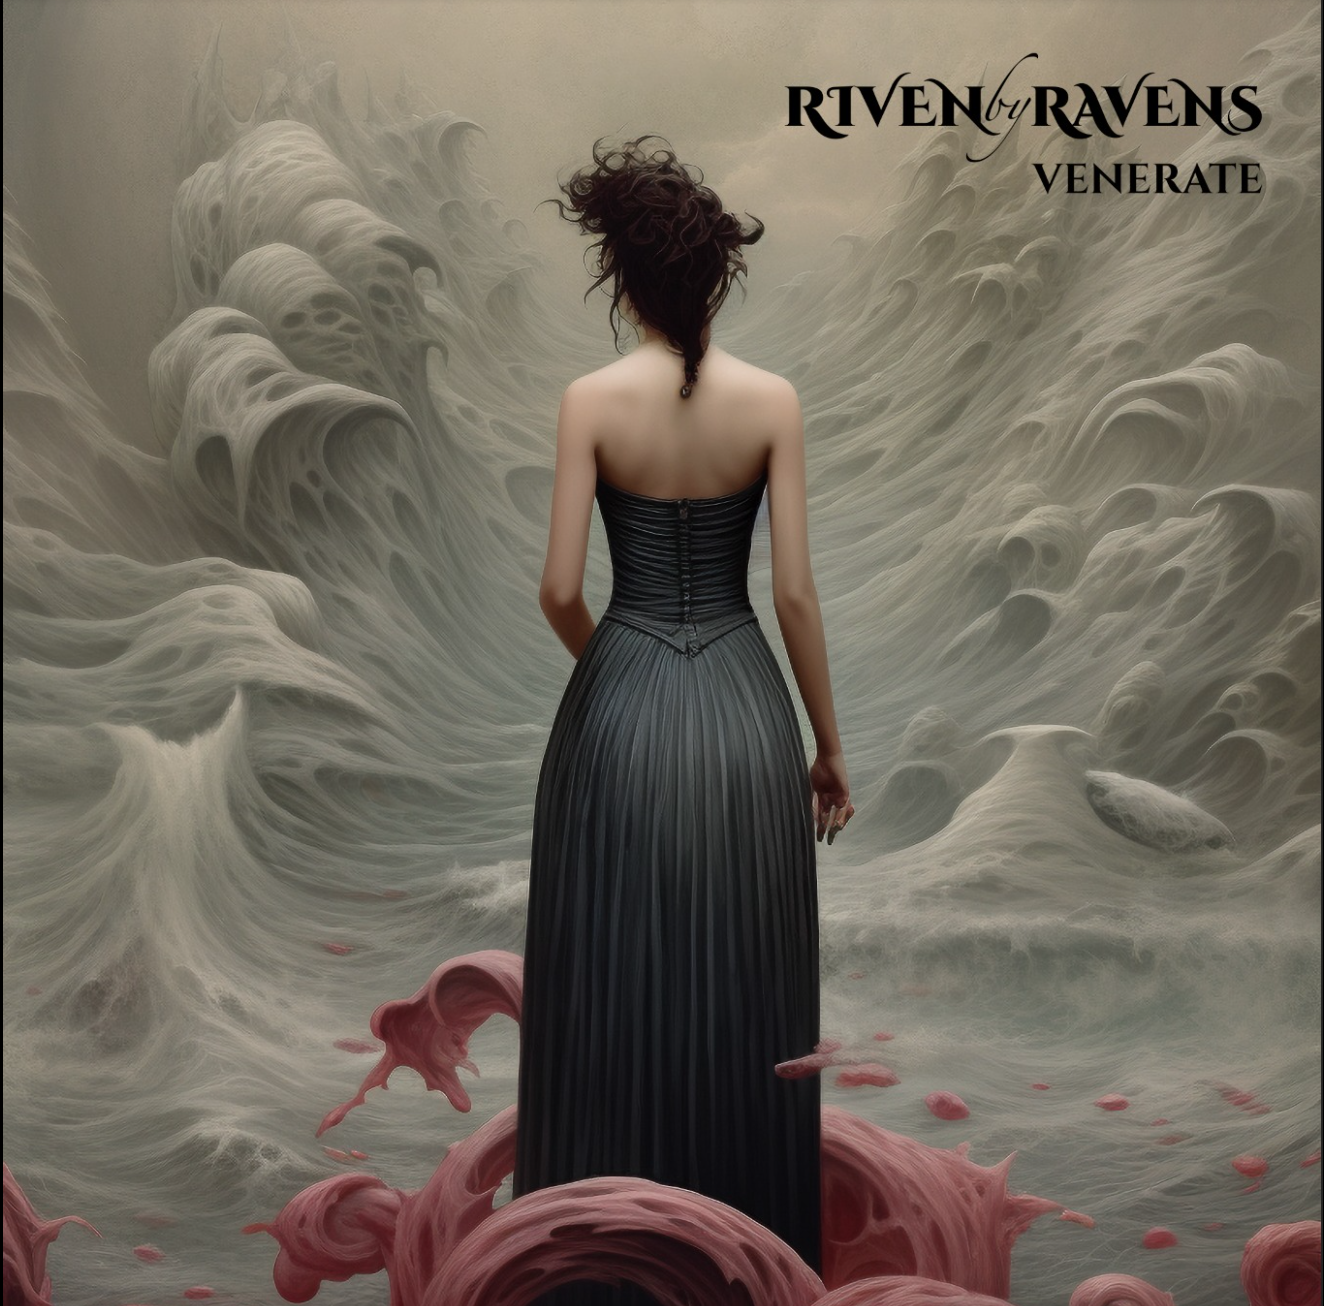 Riven By Ravens: The Rising Stars of Emotional Alternative Post Metal